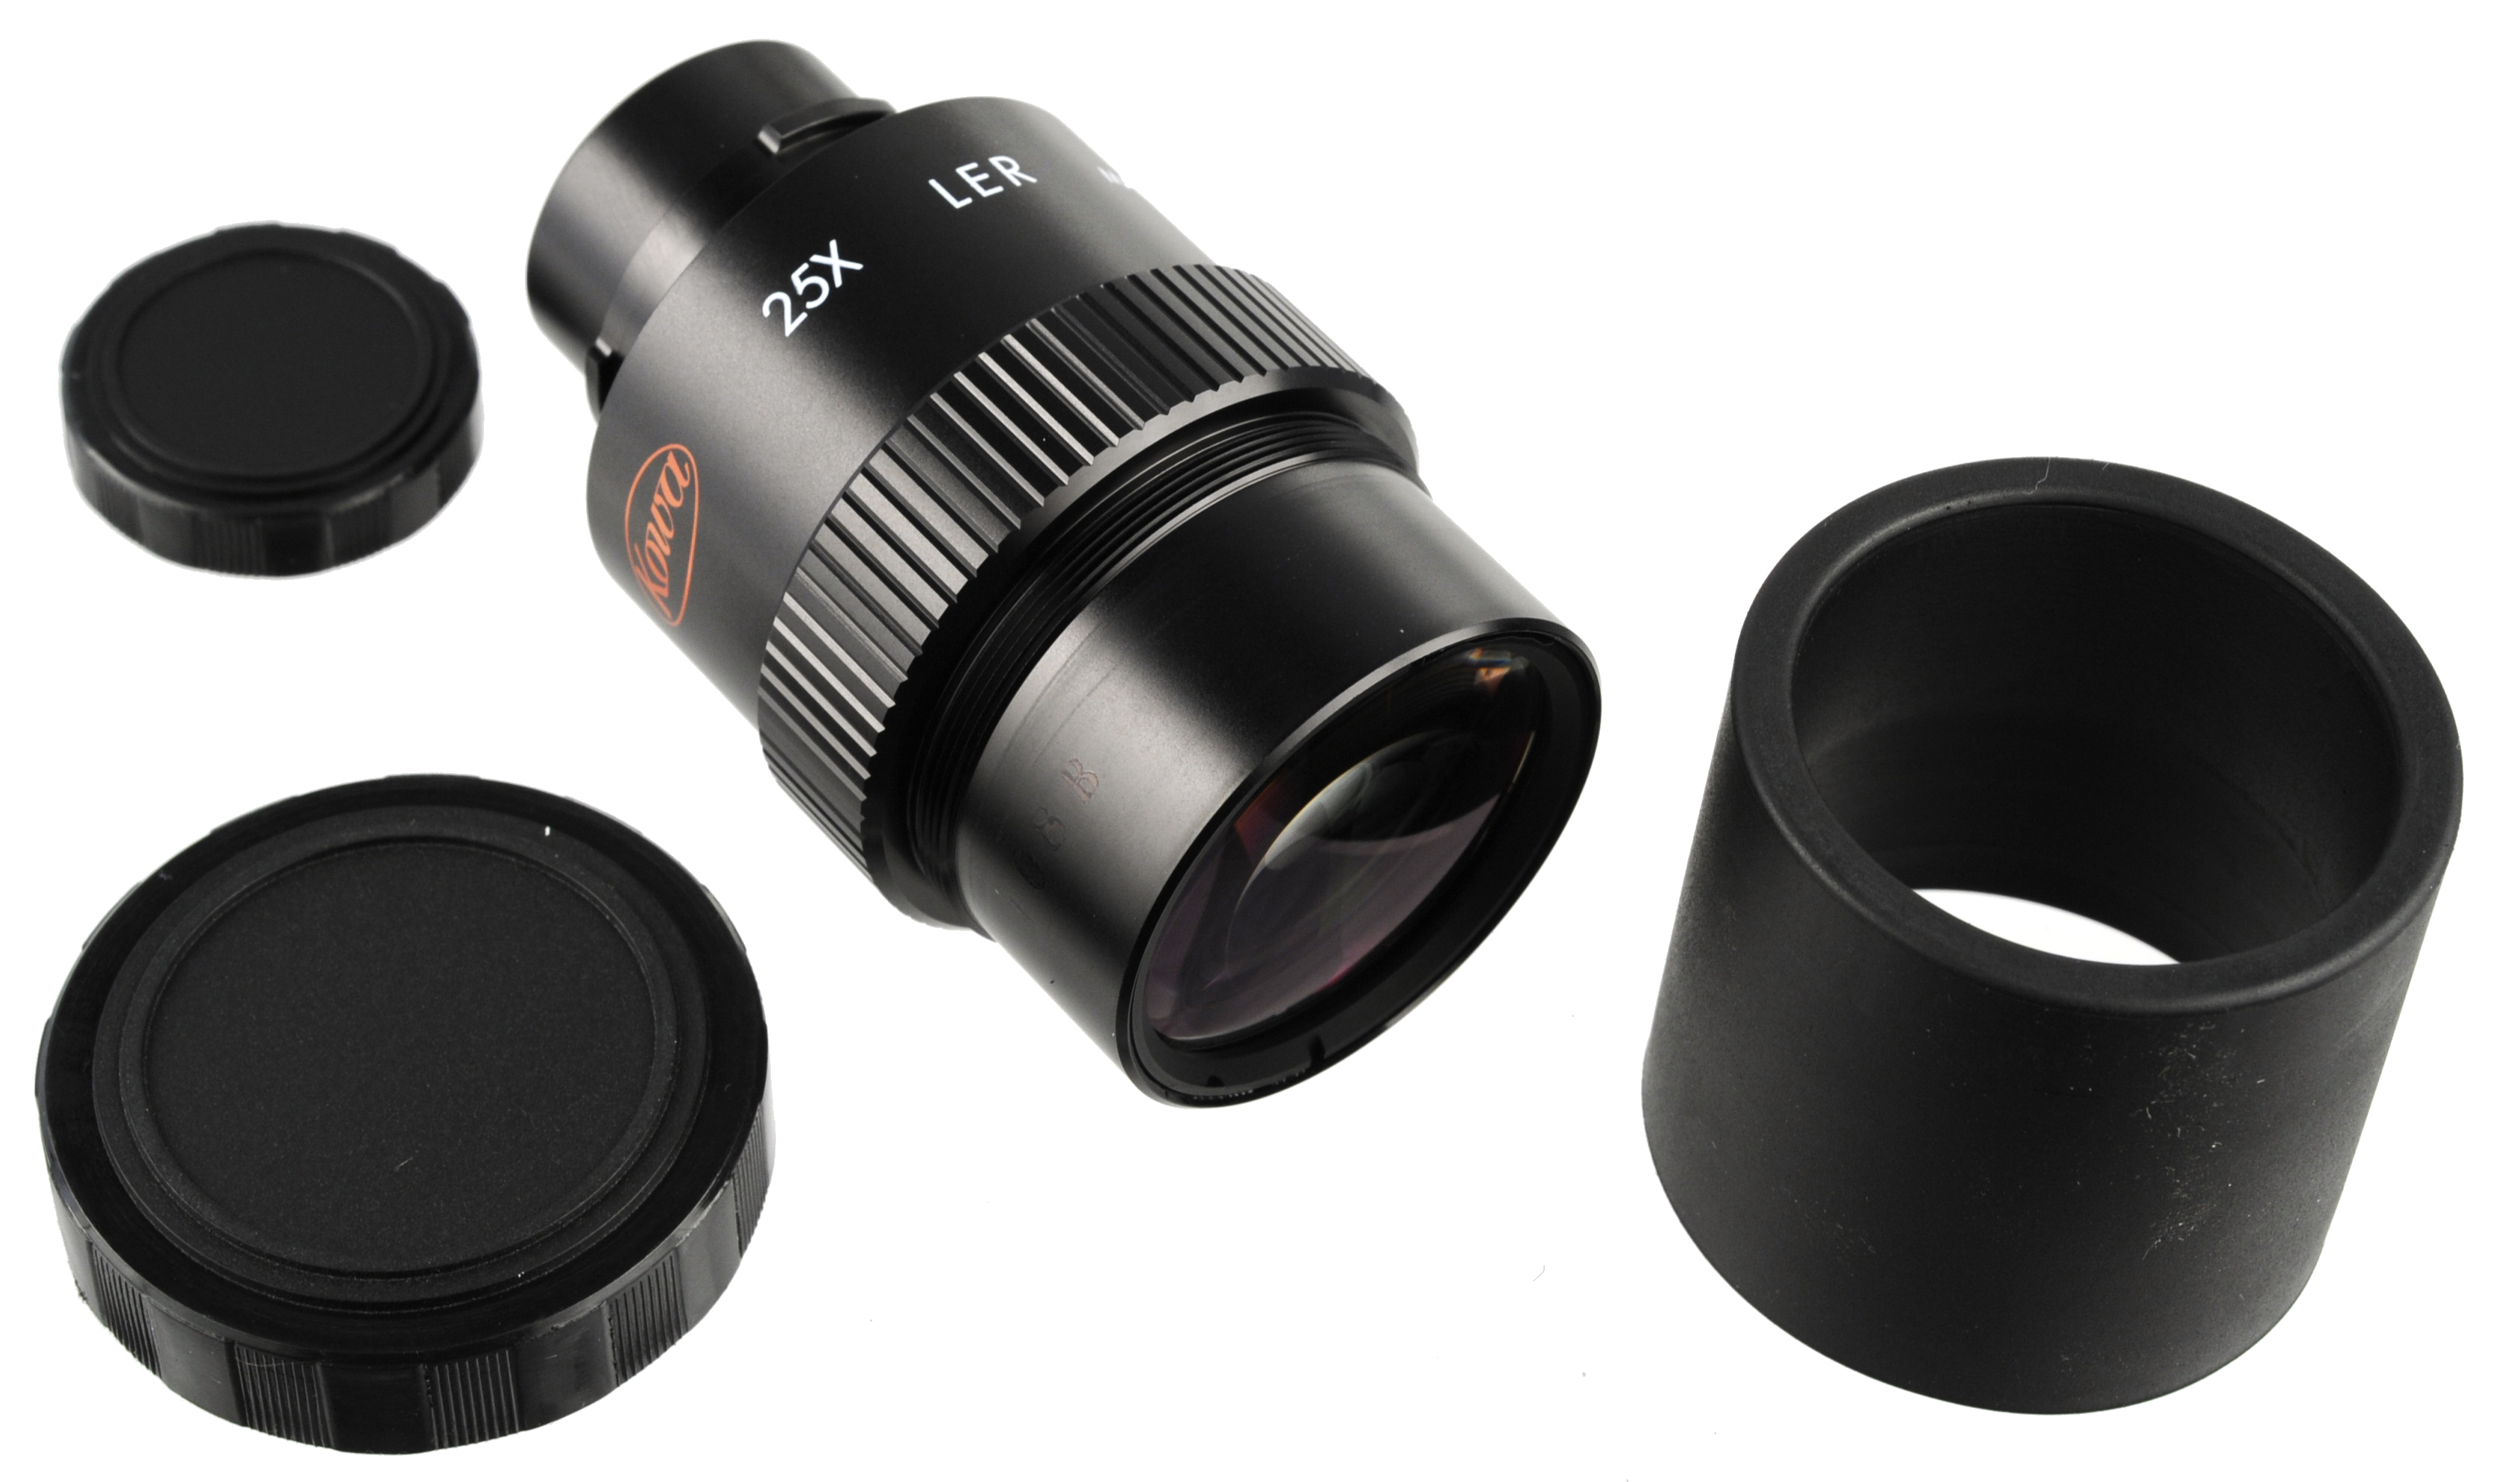 Kowa Interchangeable Eyepieces for Kowa 66mm 60mm 82SV Spotting Scopes  Up to 10% Off 4.8 Star Rating w/ Free Shipping and Handling